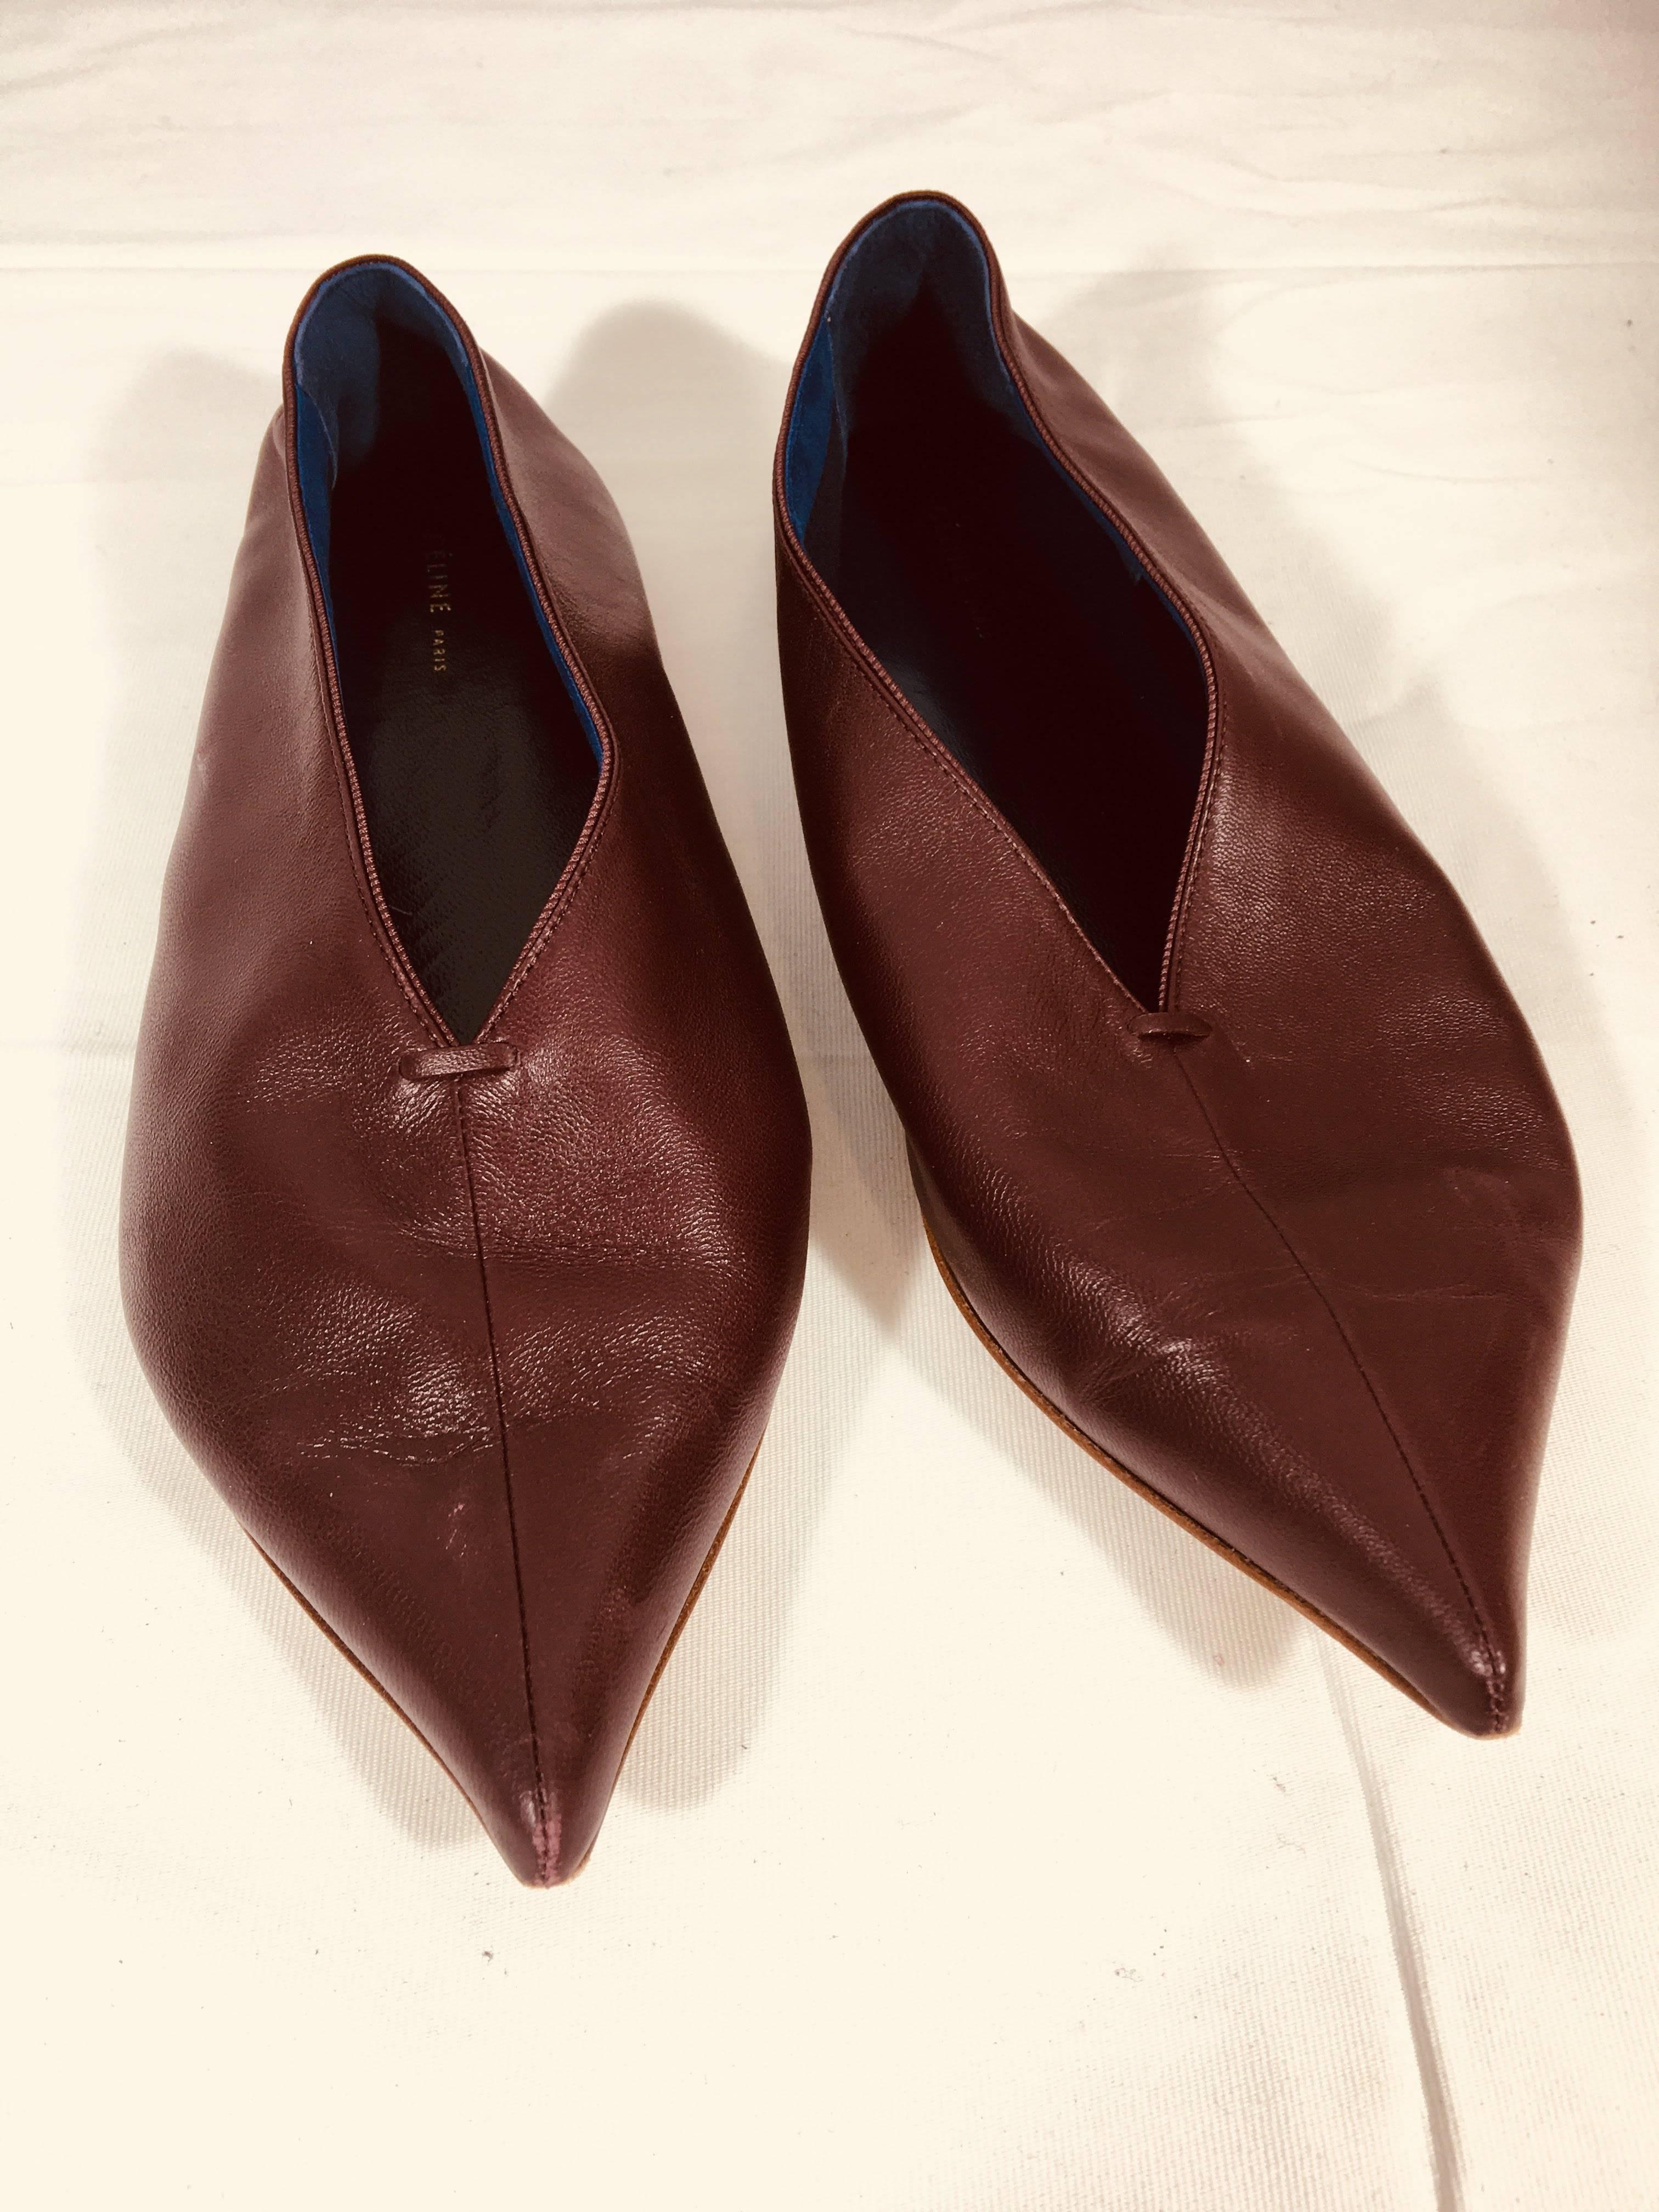 Celine Pointed Leather Flats with V-Cut in Maroon Leather.